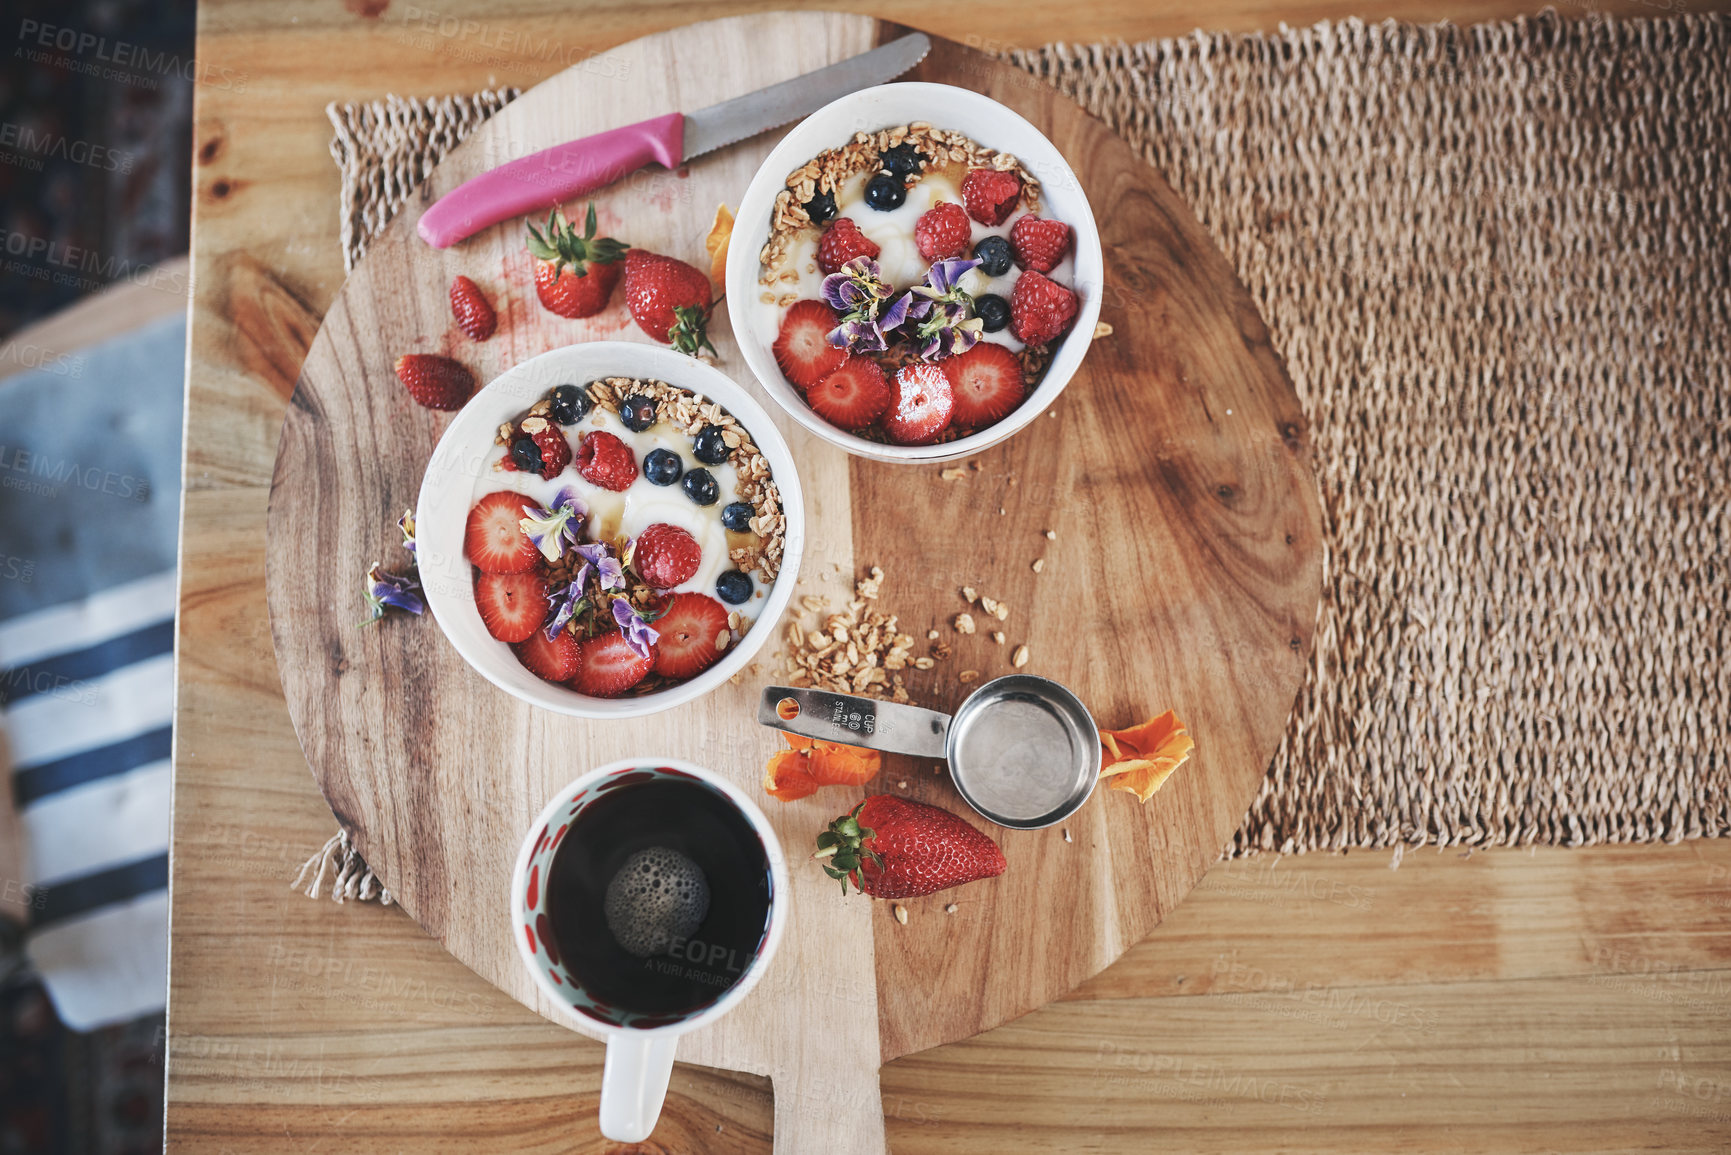 Buy stock photo Healthy breakfast, cereal and diet above on table of fruit, wheat or oats for organic food, wellness or fiber nutrition at home. Bowls for brunch with cup of coffee for dieting plan on counter top